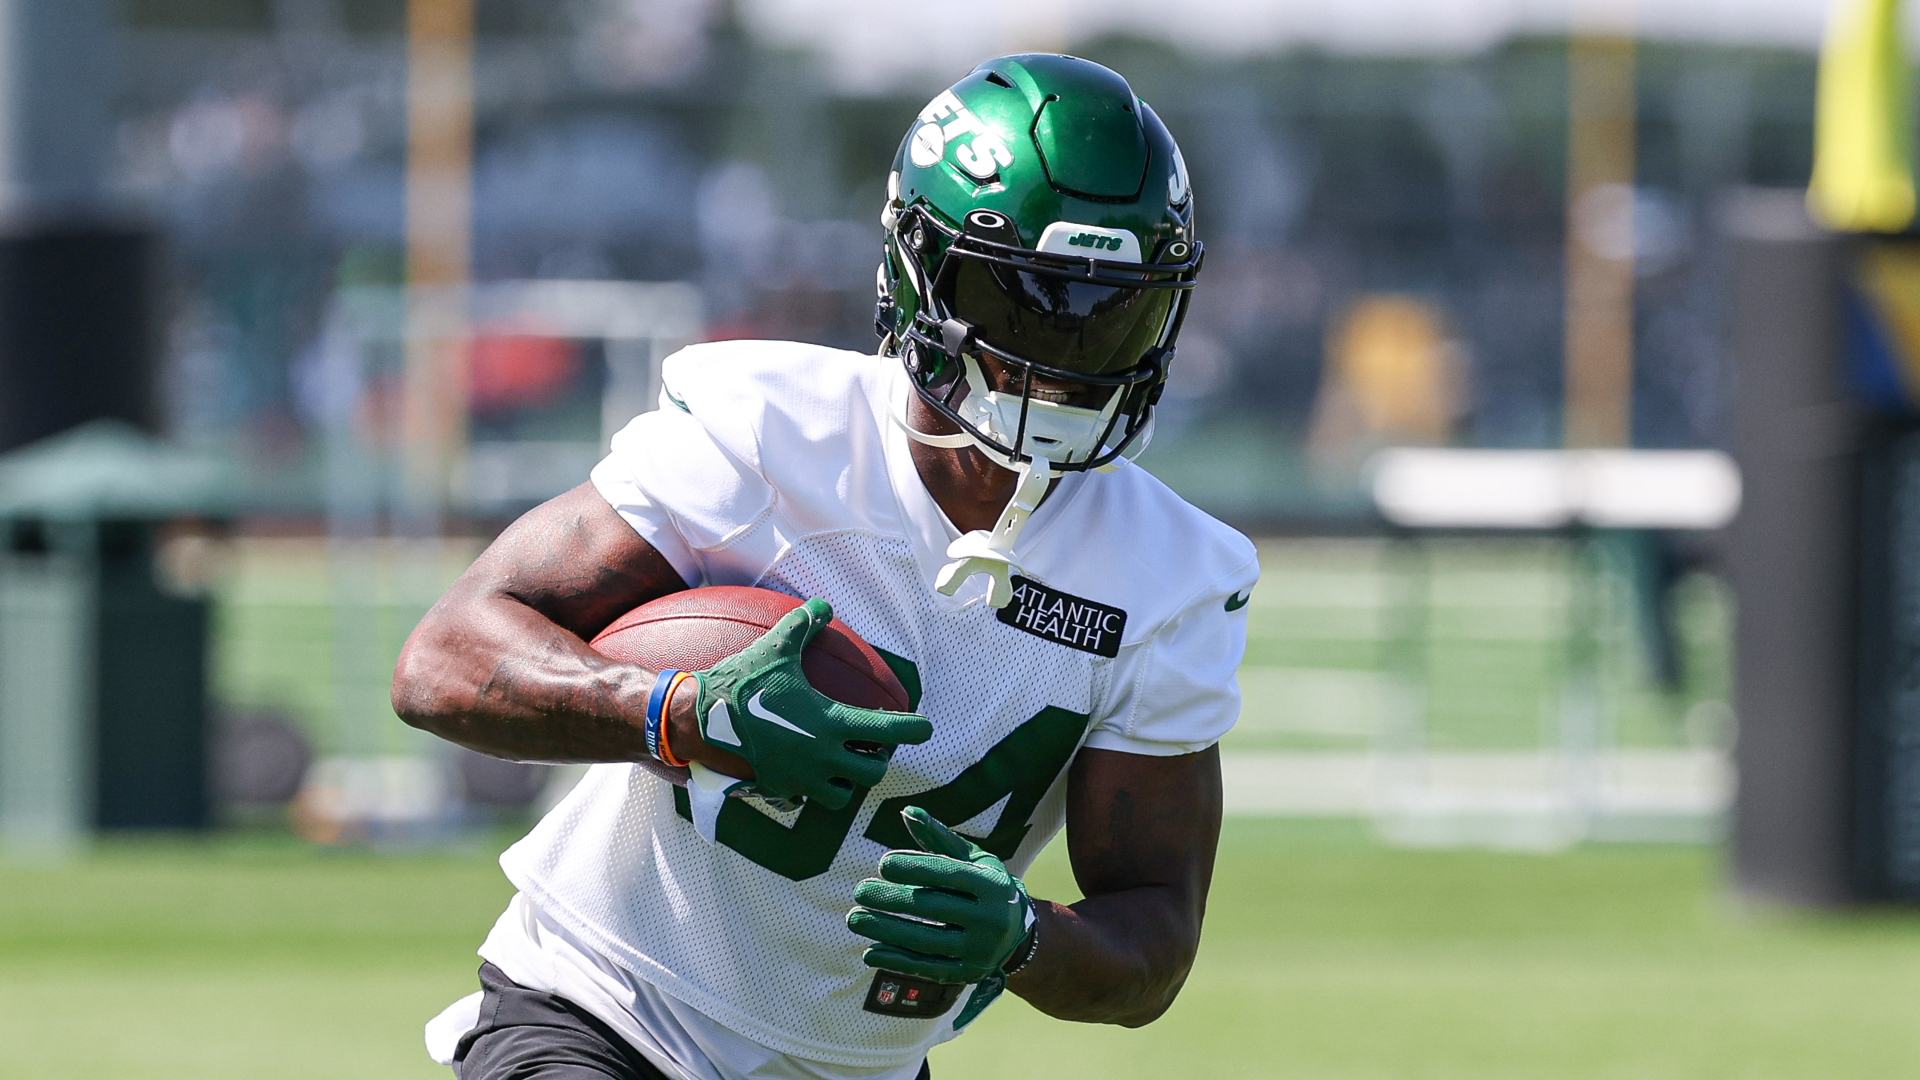 Jets Wide Receiver Shockingly ‘Stepping Away’ From NFL